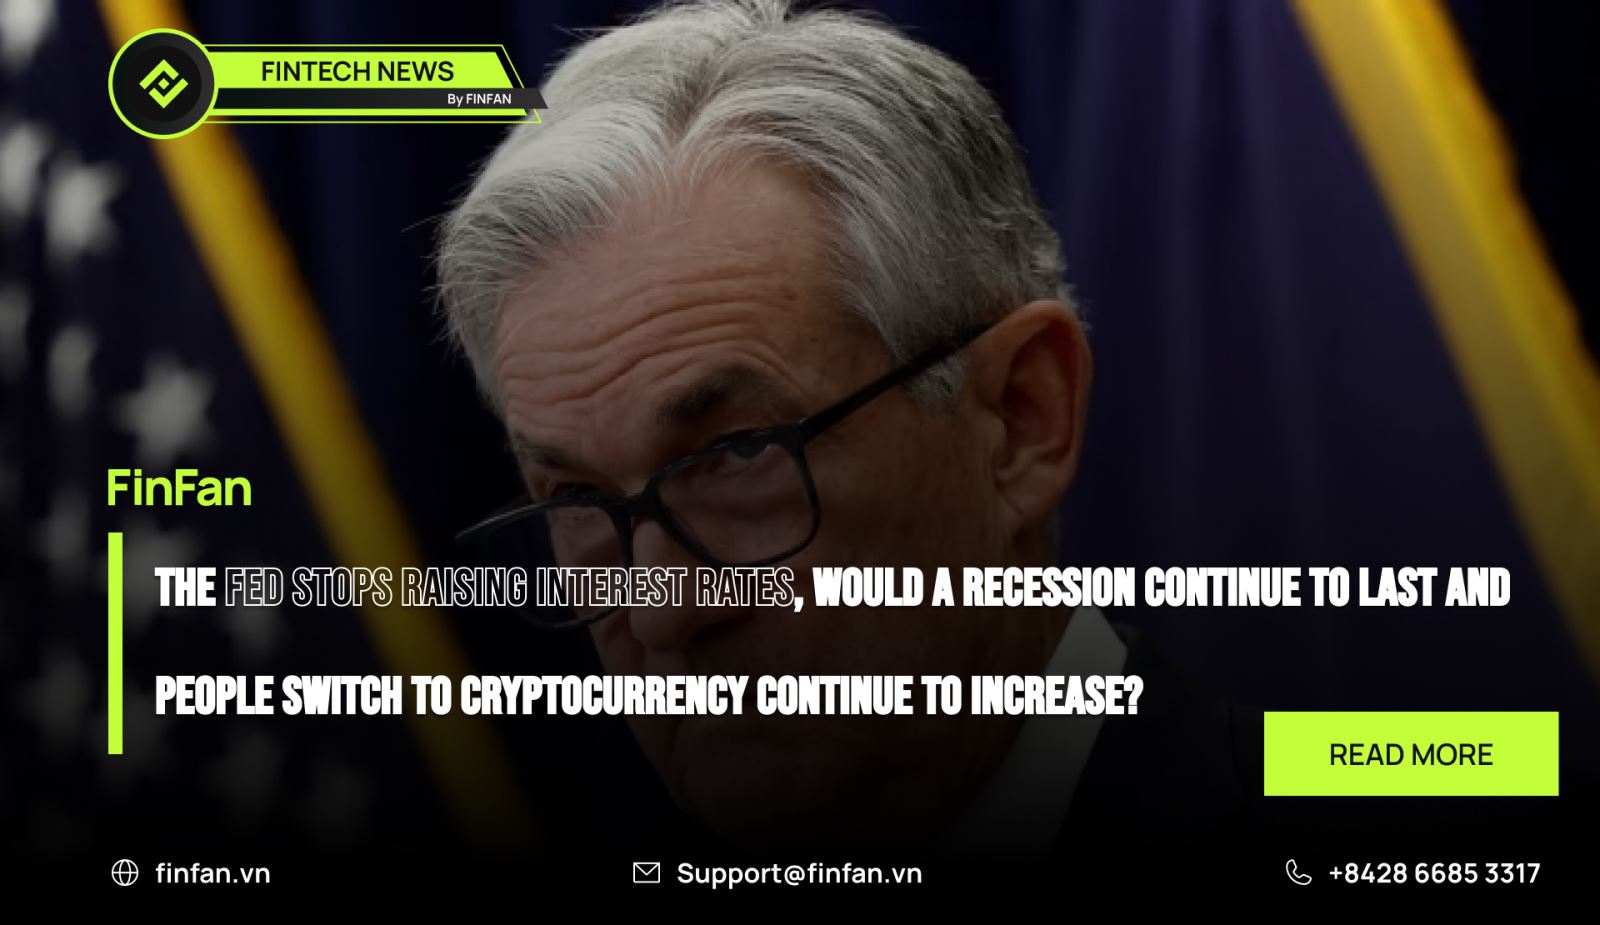 The Fed stops raising interest rates, would a recession continue to last and people switch to cryptocurrency continue to increase?